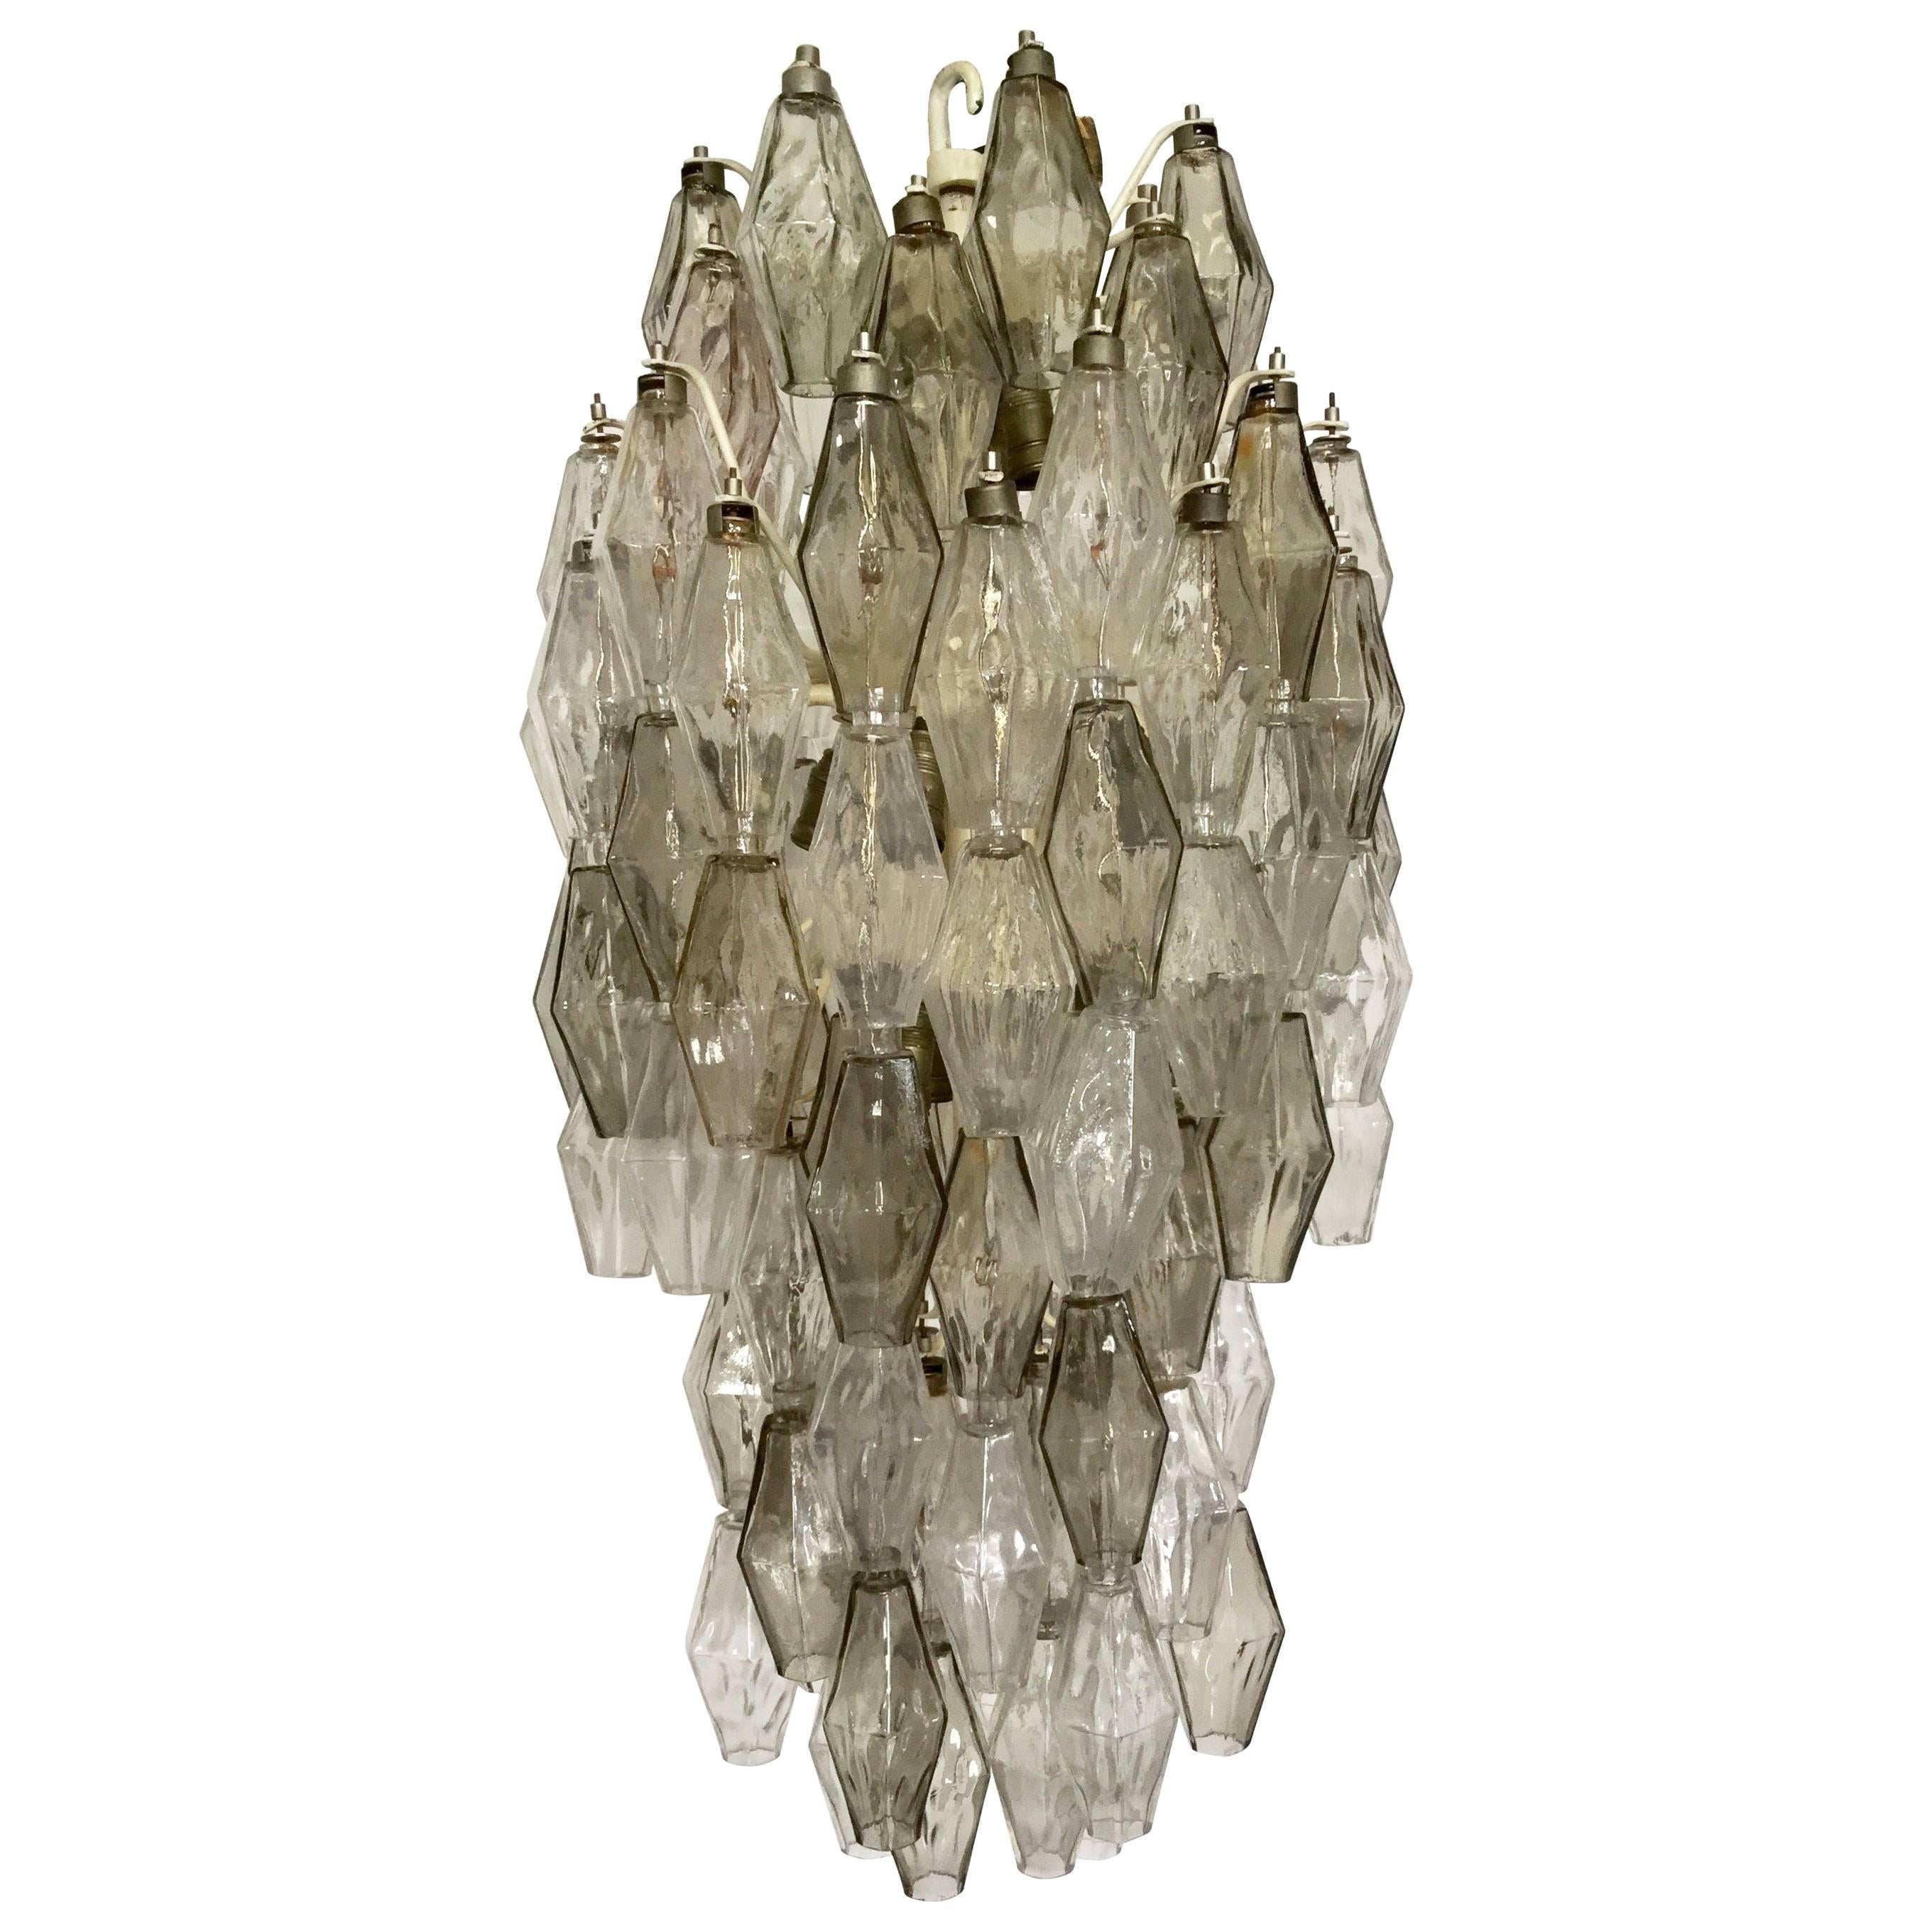 Polyhedral Chandelier by Carlo Scarpa for Venini For Sale